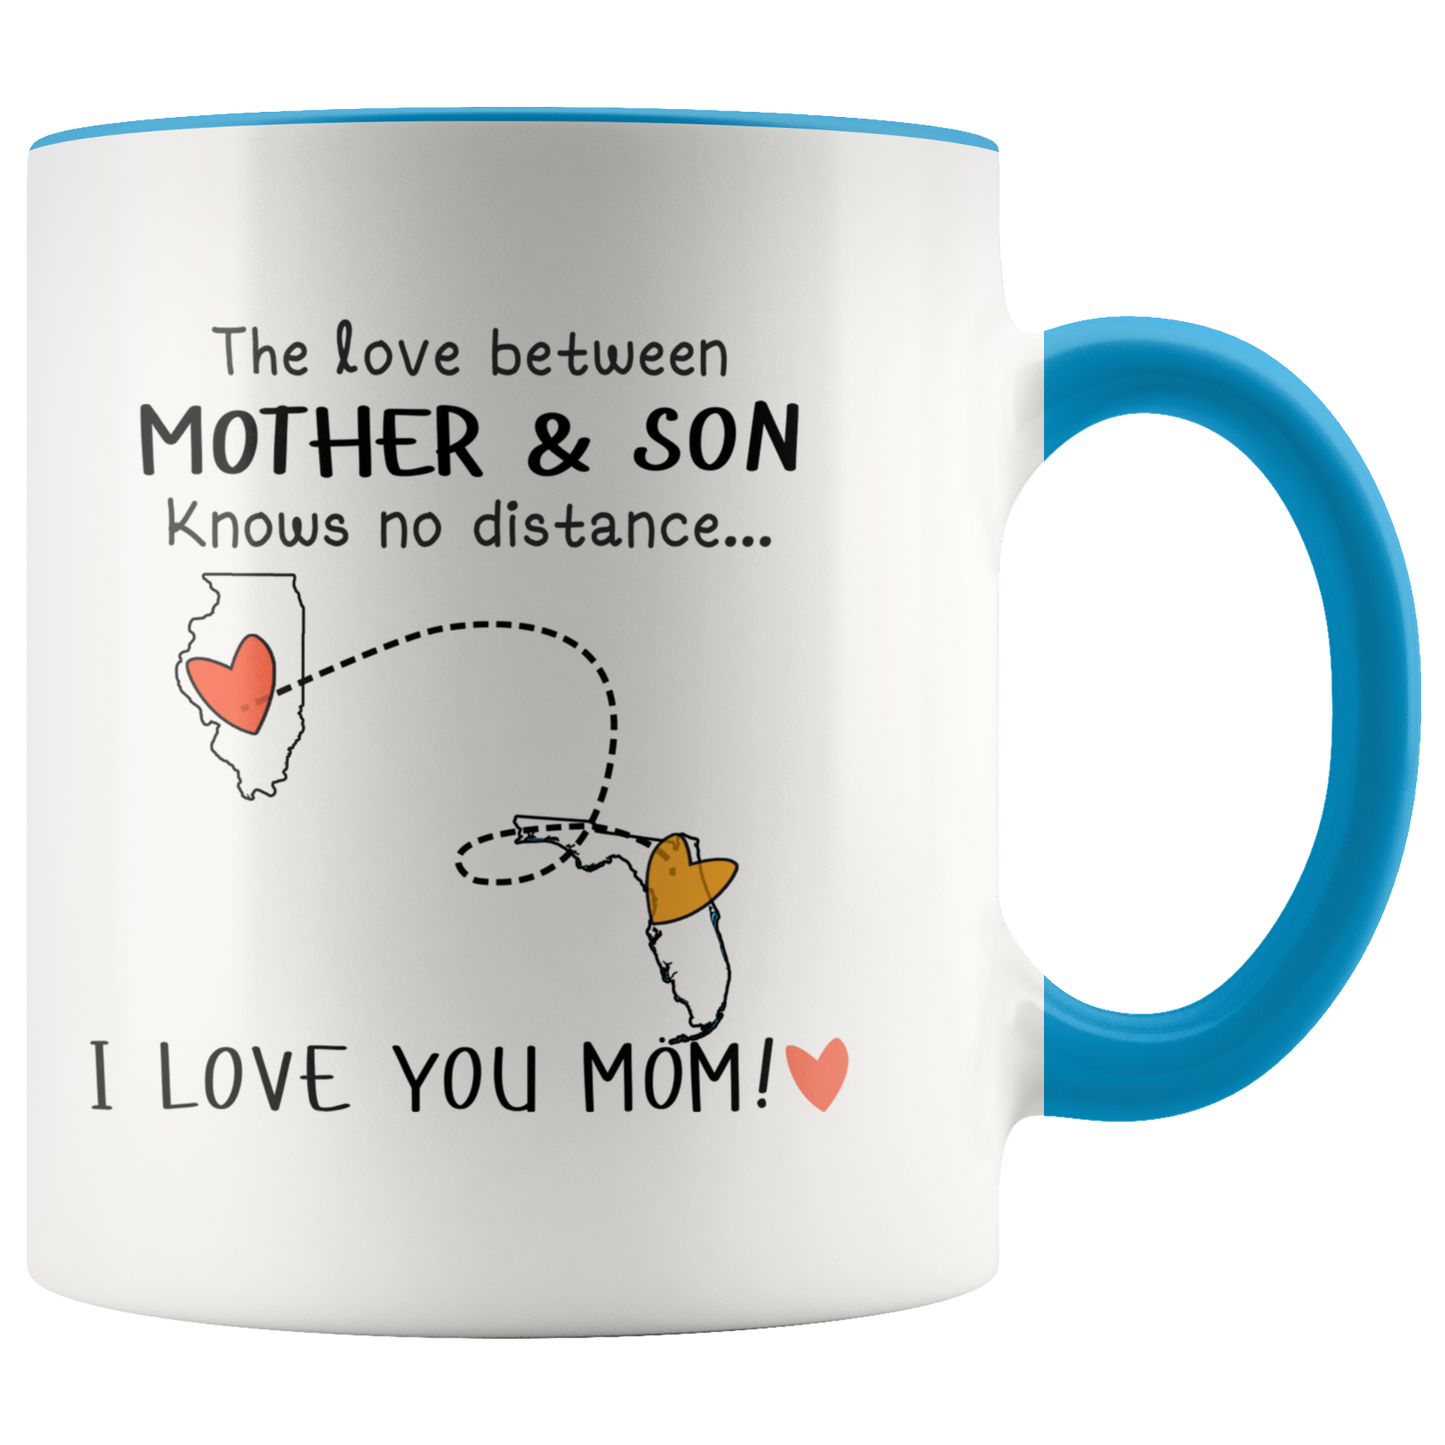 MUG01221340349-sp-23172 - The Love Between Mother And Son Knows No Distance, I Love Yo